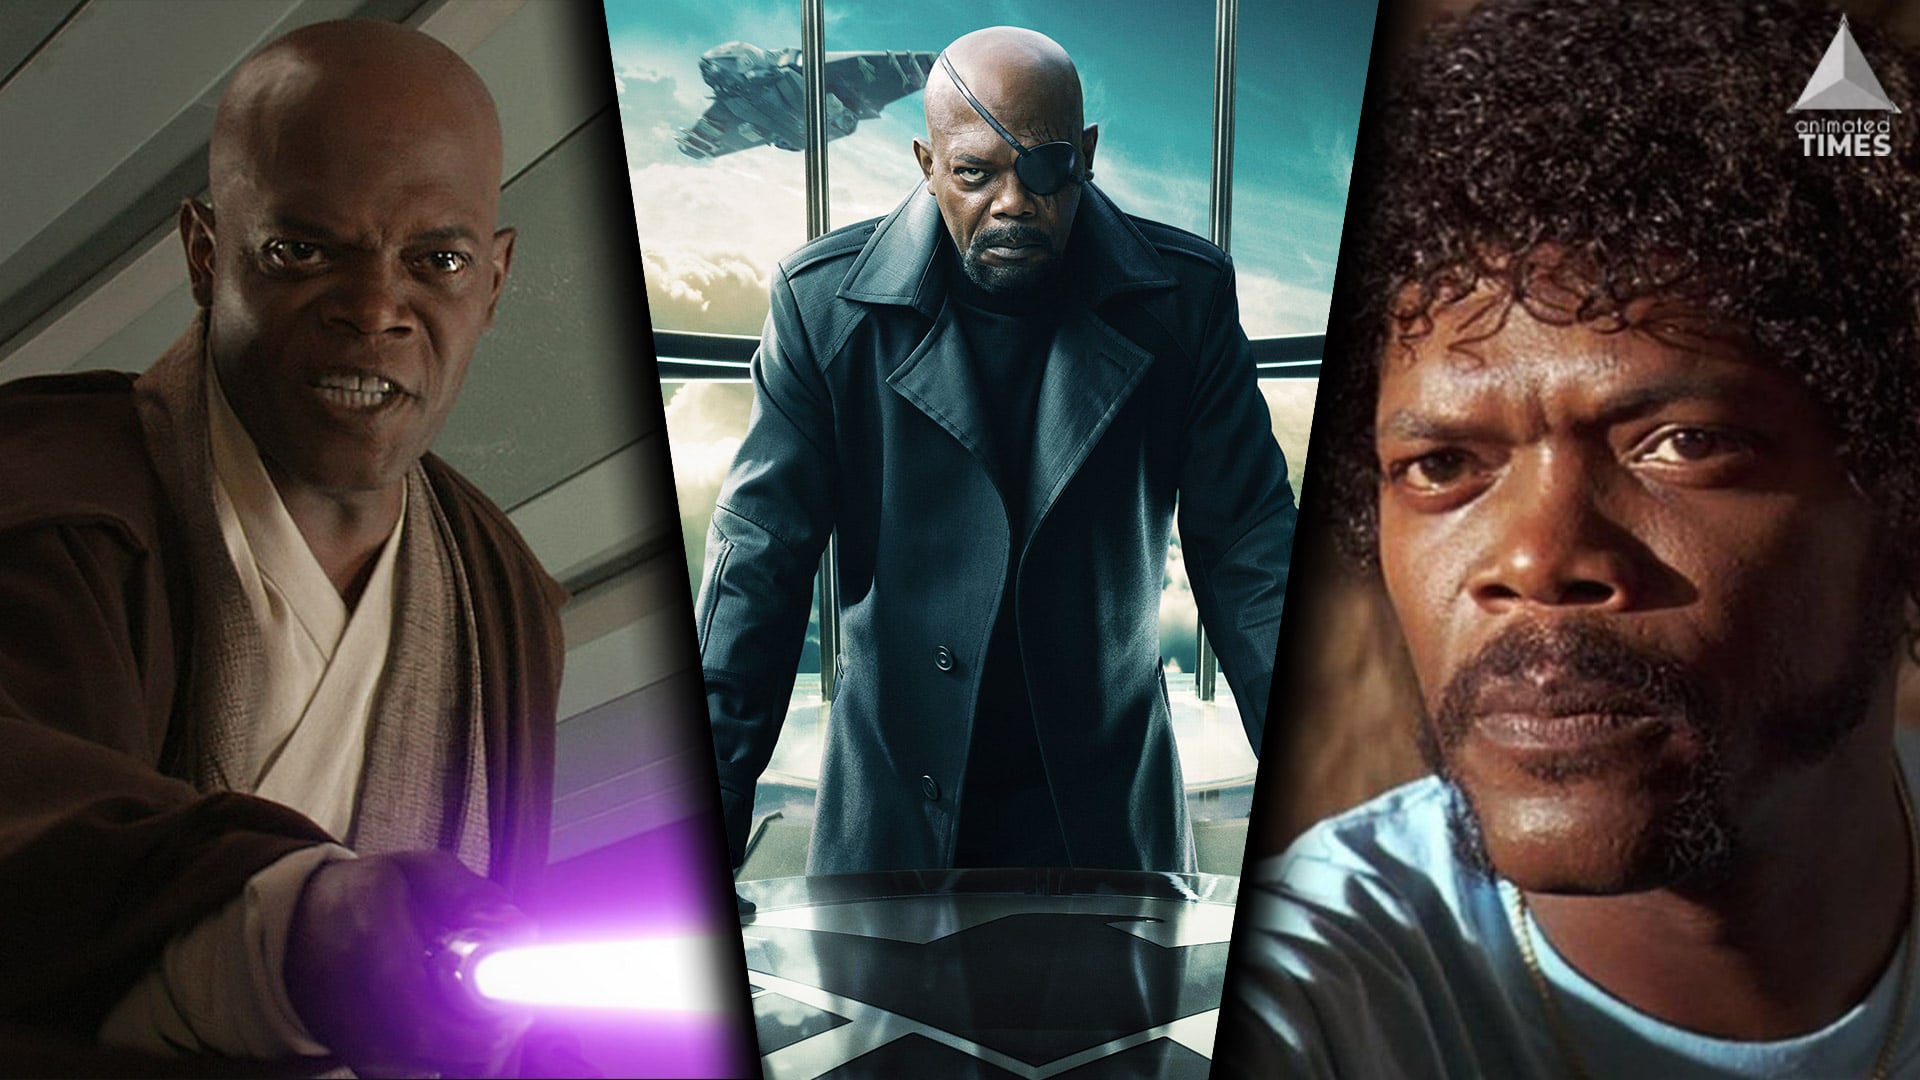 Samuel L Jackson’s Best Characters – Ranked From Most Heroic To Most Villainous